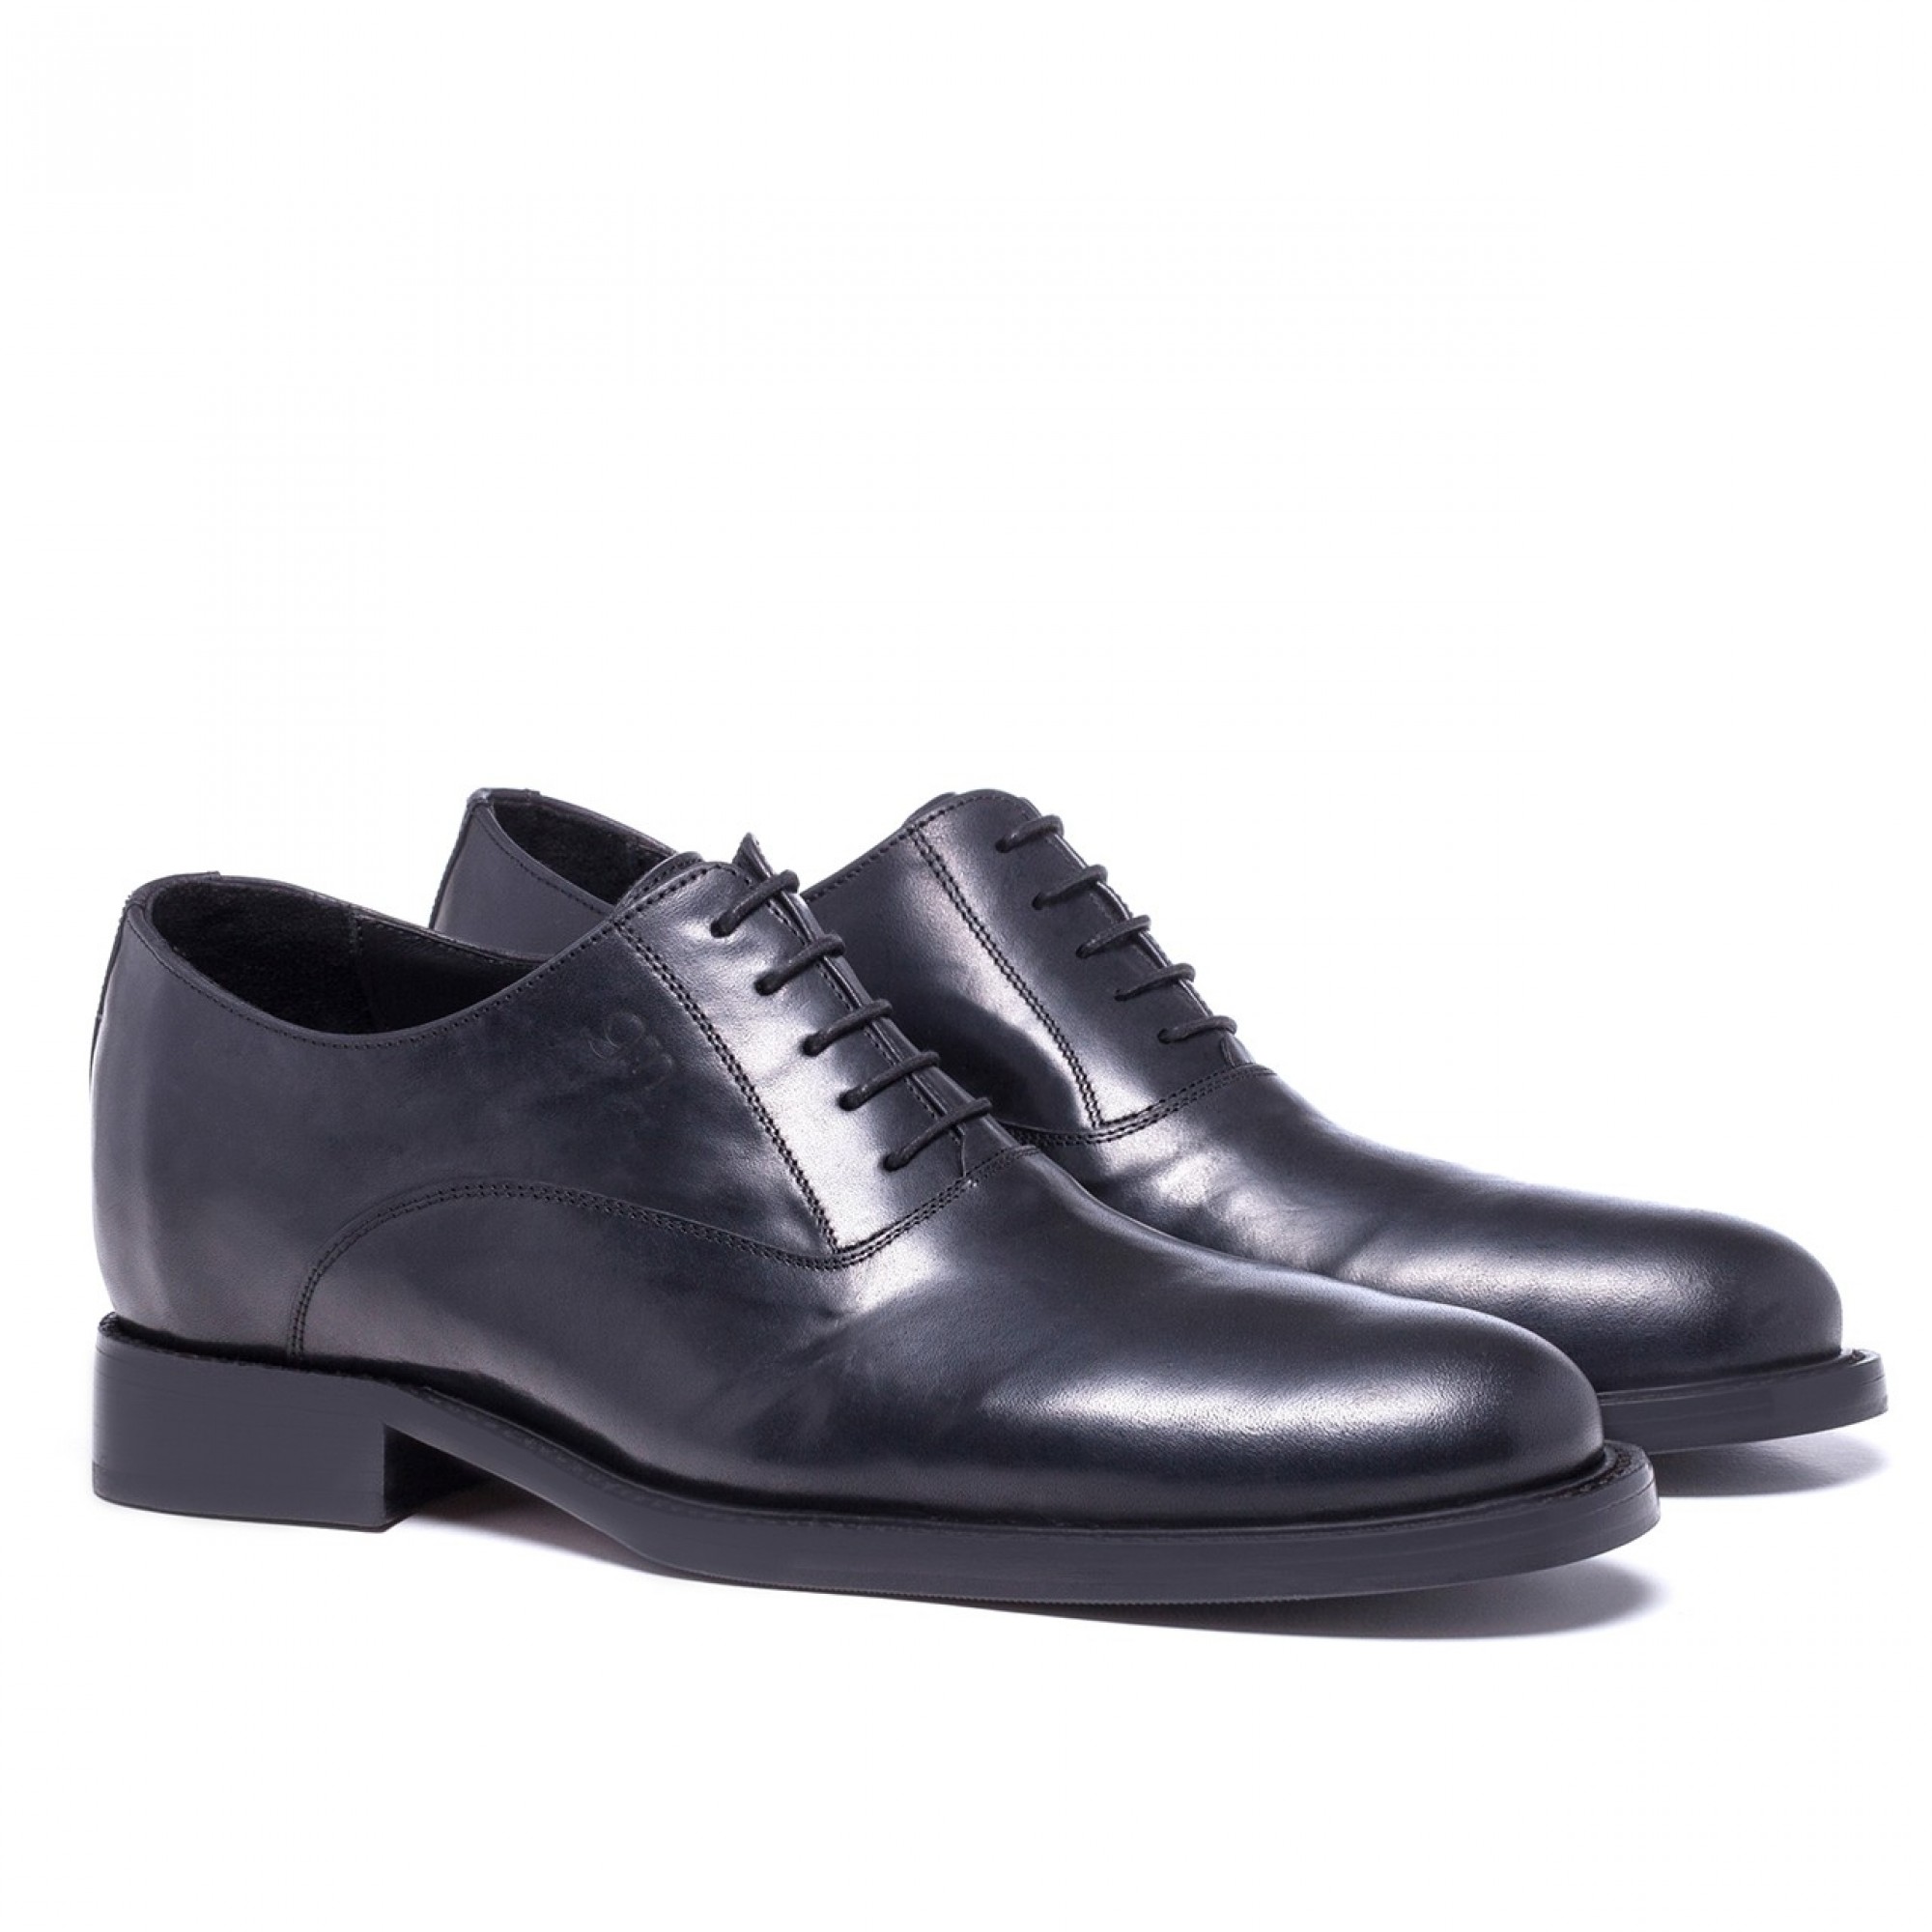 Via Frattina - Elevator Shoes in Leather plus from 2.4 to 3.1 inches